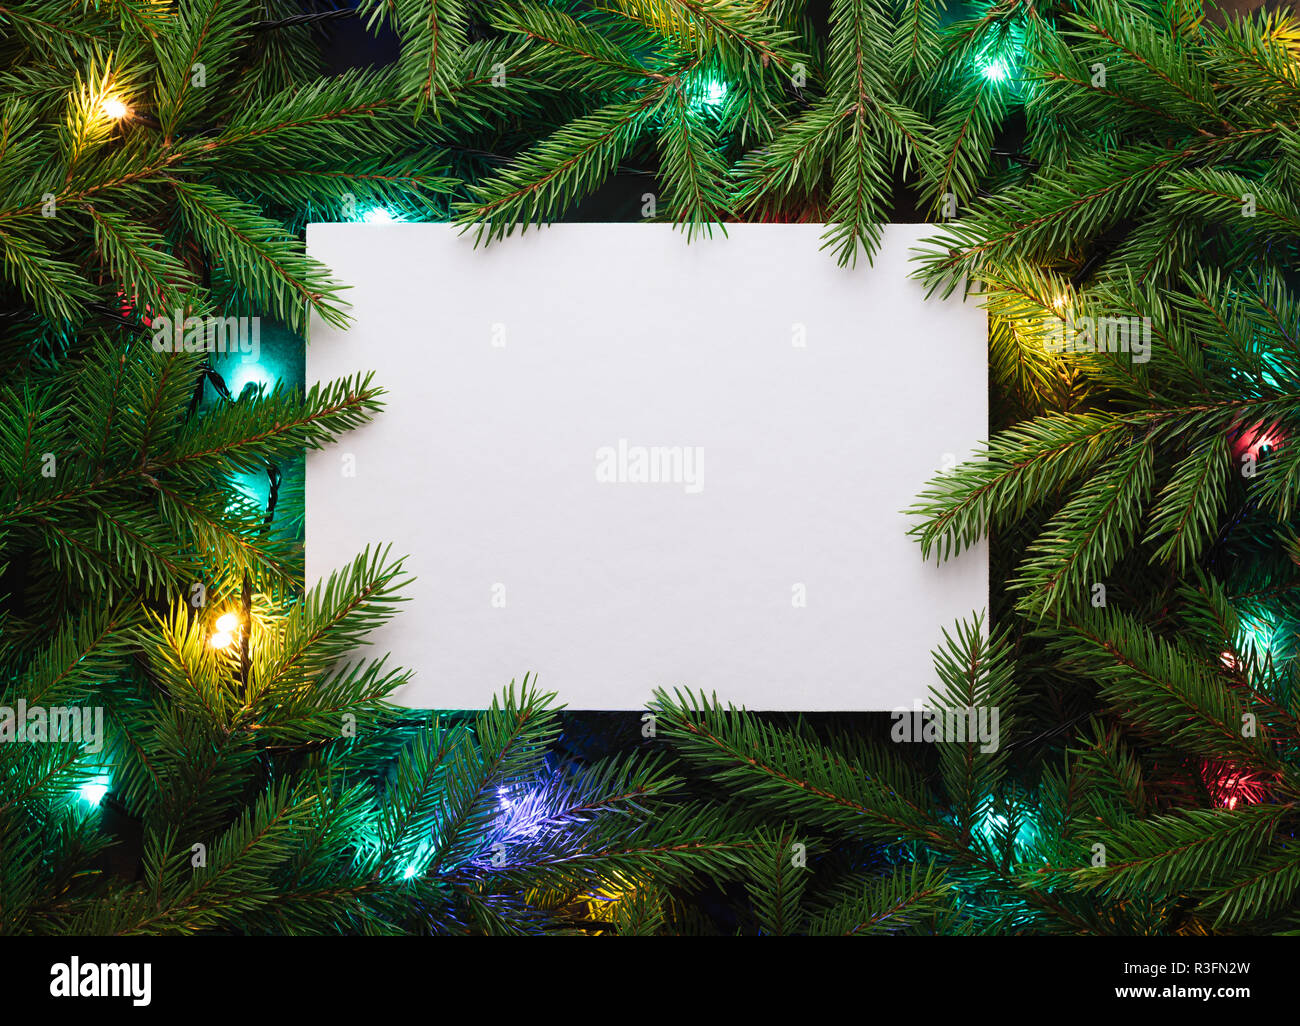 Christmas card for advertising text. Decorative frame of fir branches and Christmas lights Stock Photo